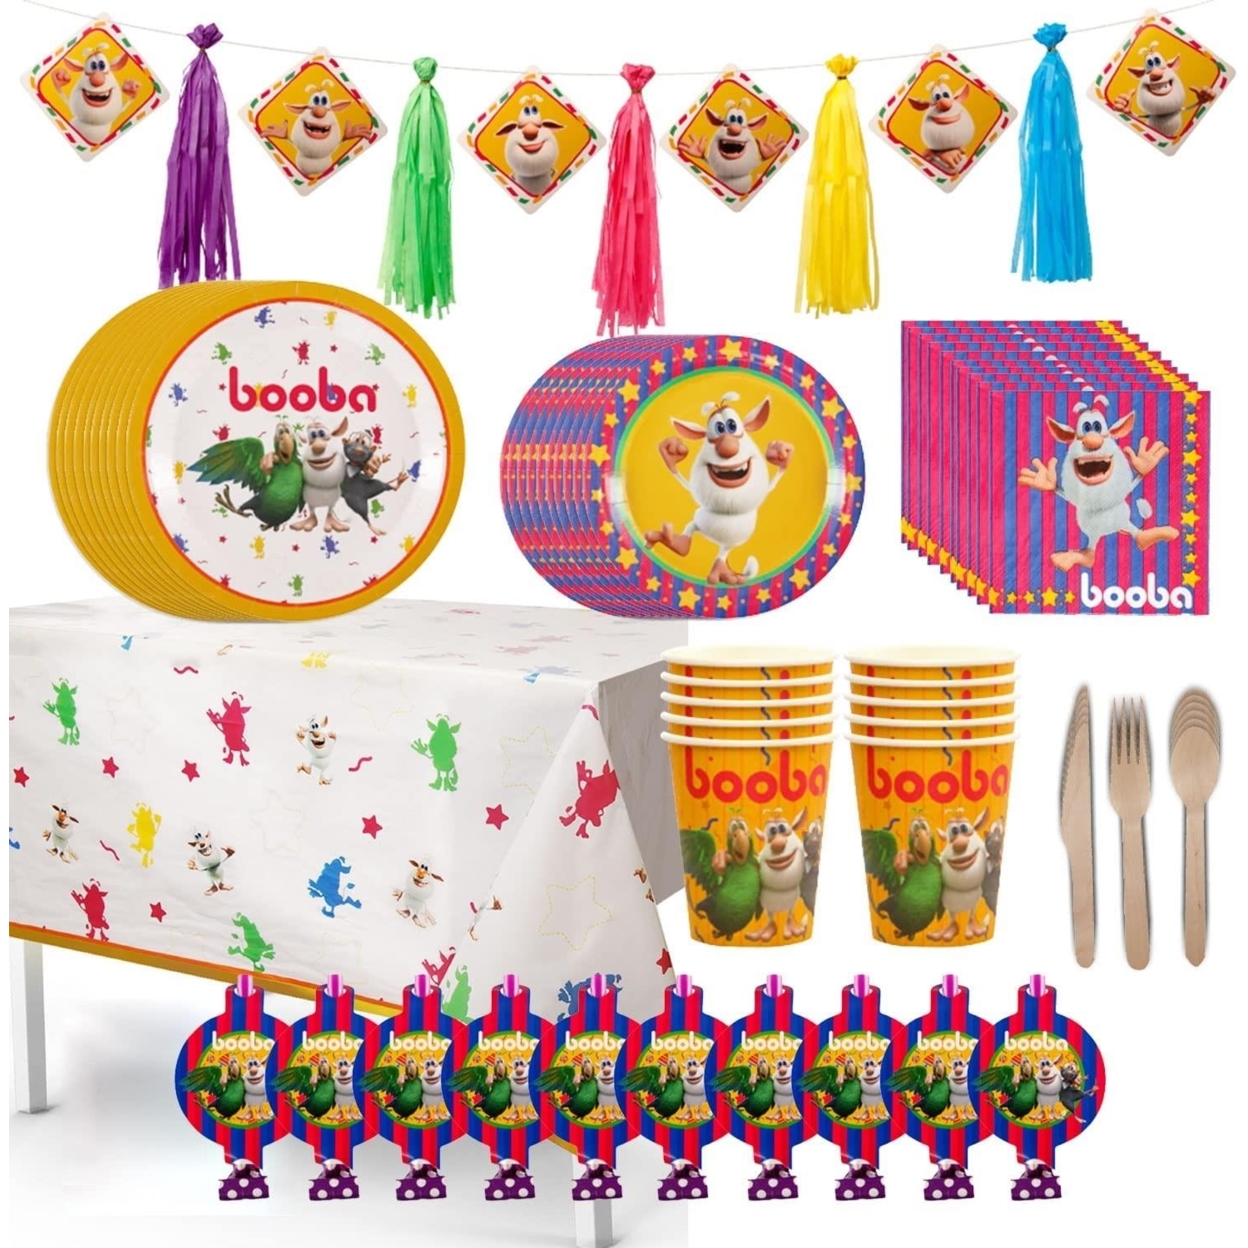 Booba Cartoon Official Birthday Party In A Box 82pc Set Decorating Kit Napkins Cups Utensils Mighty Mojo